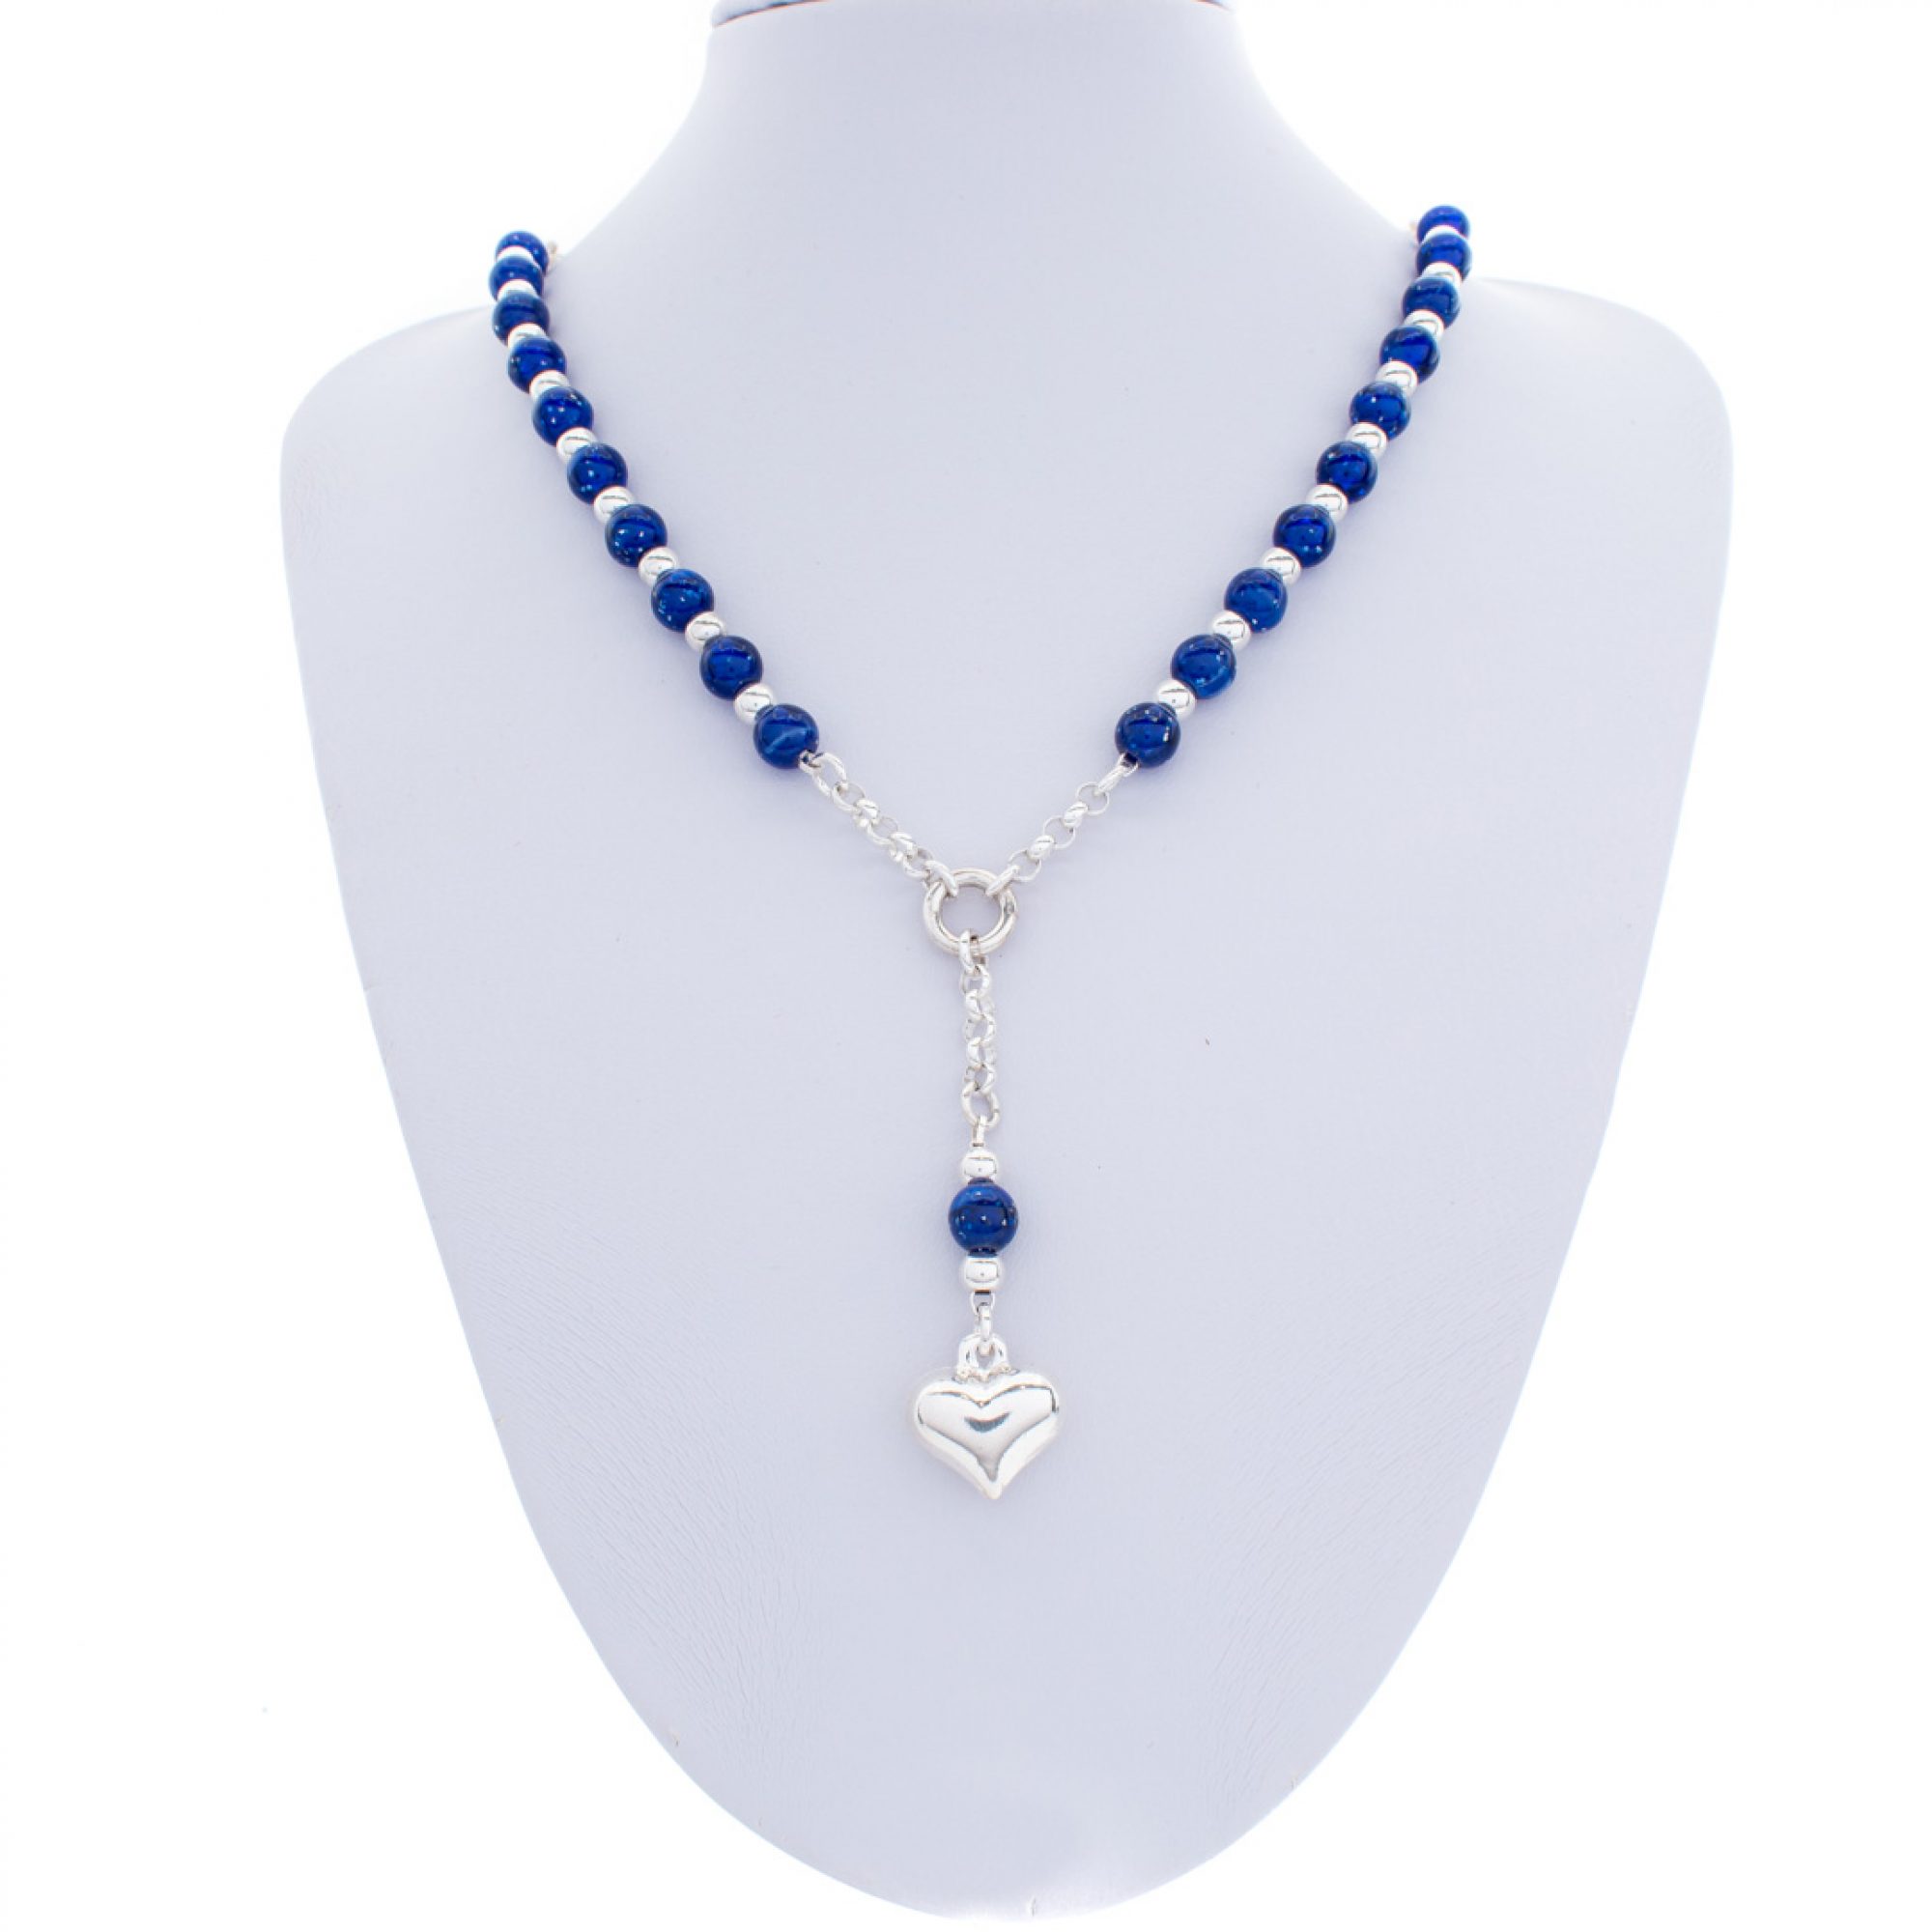 Y-style silver necklace with lapis lazuli stones